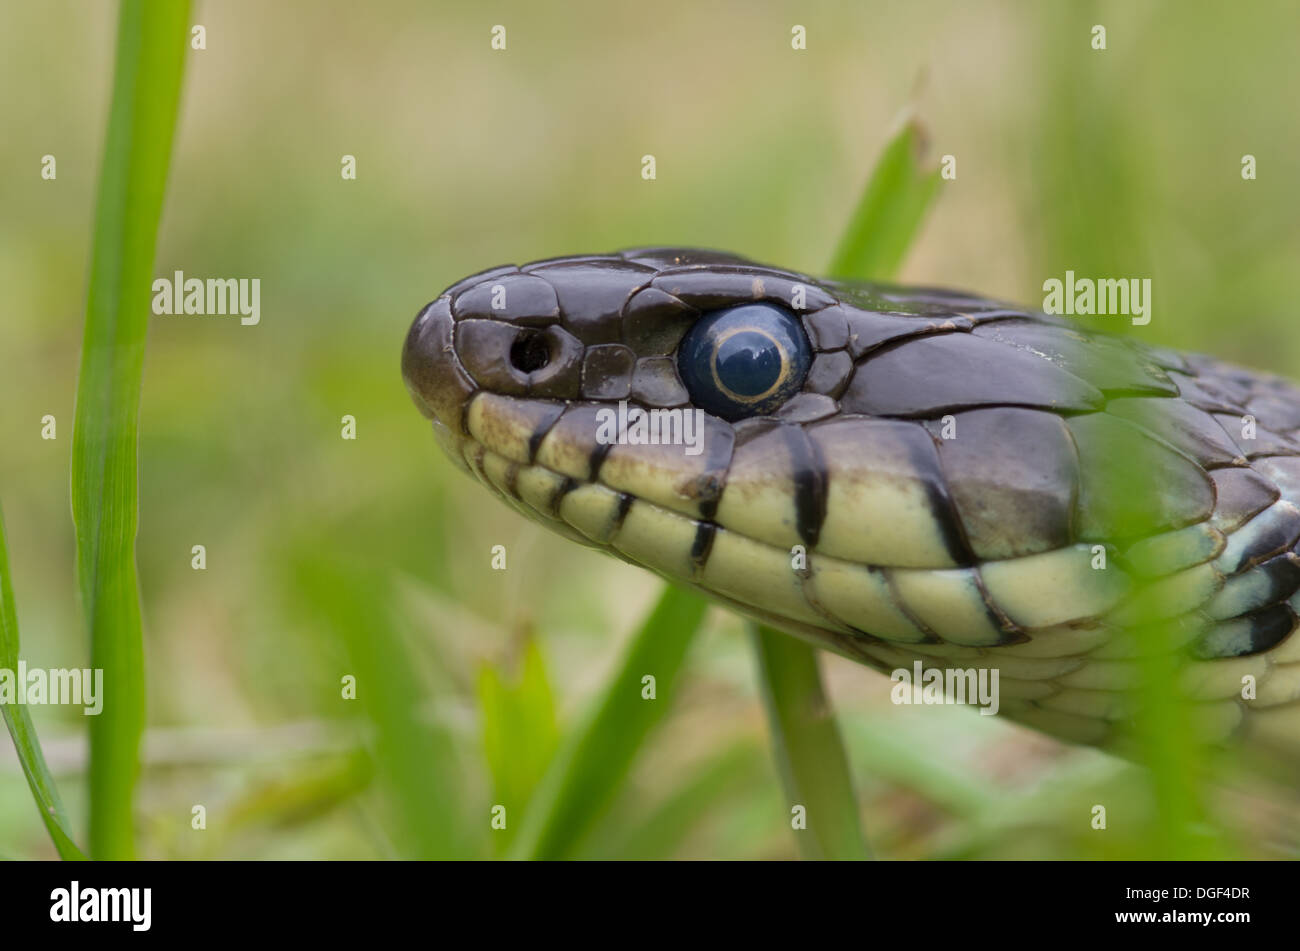 Close up of a grass snake head in the grass Stock Photo